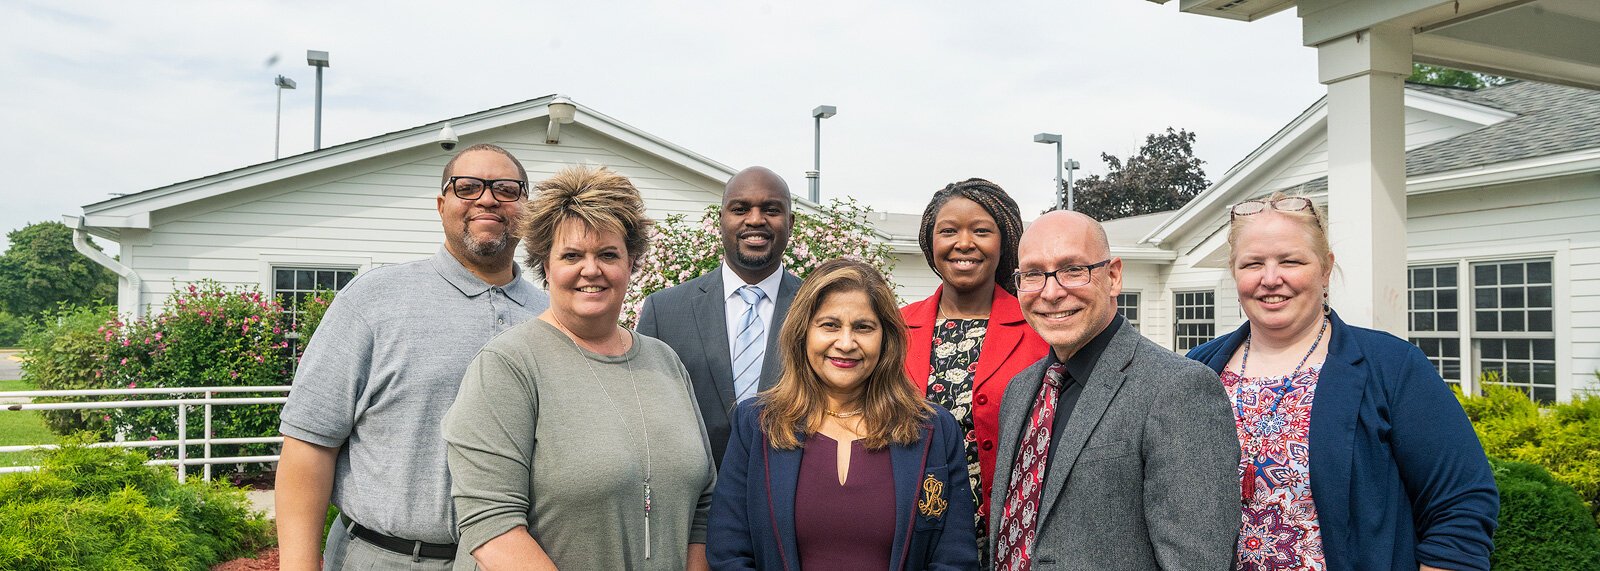 Steven Elam, Ginelle Skinner, Gregory Anglin, Mumtaz Haque, Alena Zachery-Ross, Carlos Lopez, and Nina Harris at YCS Administration Building.